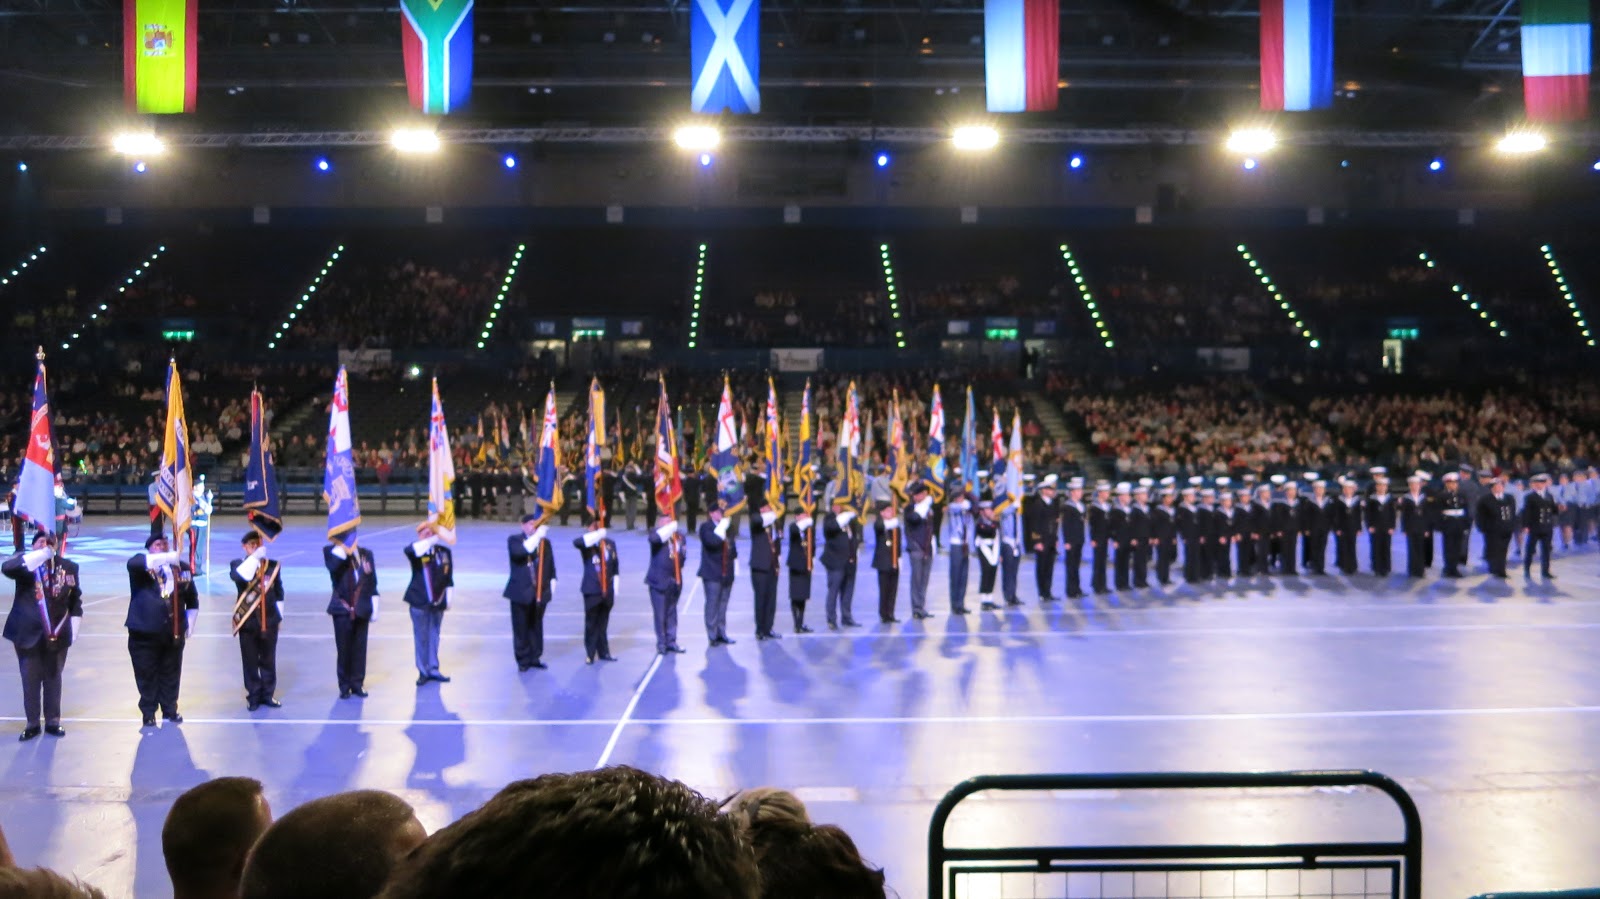 The life and times of Tim: The 2017 Birmingham International Tattoo